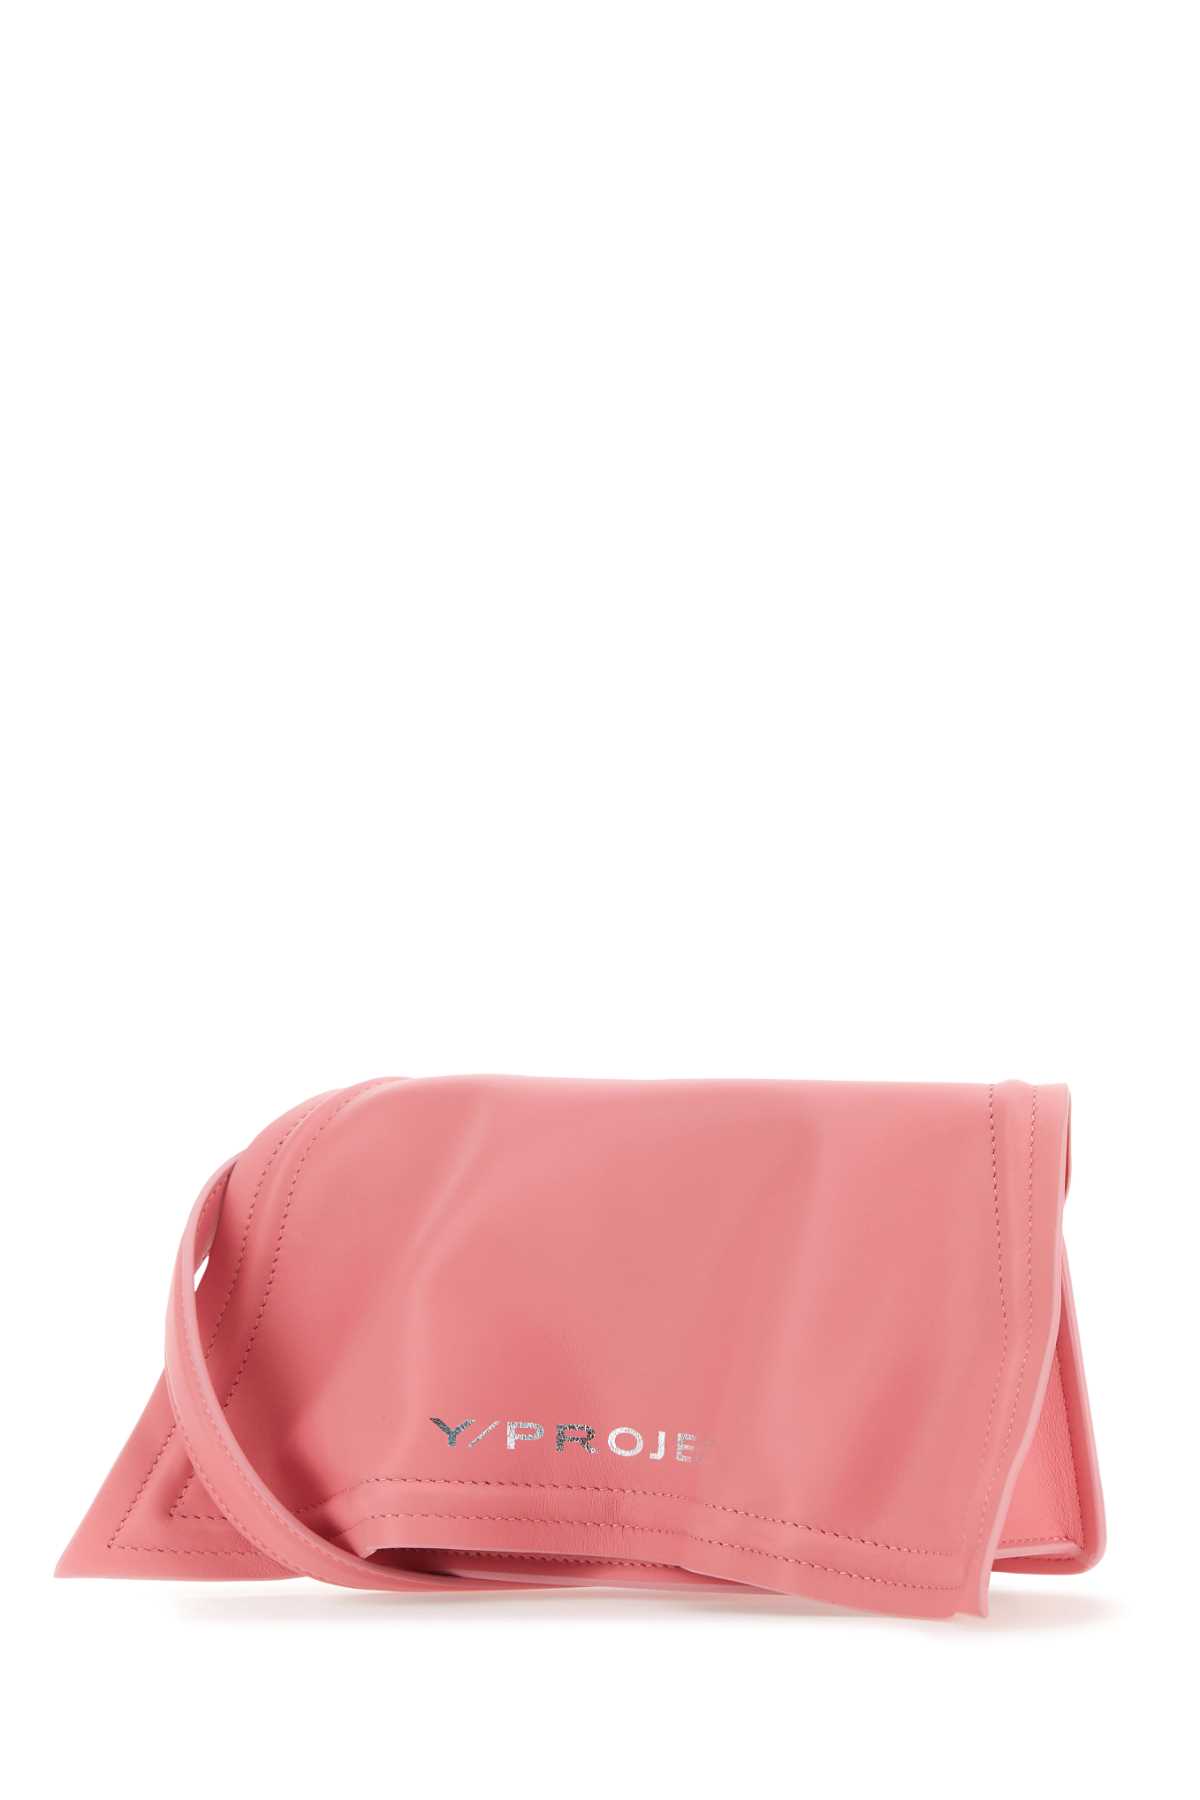 Y/PROJECT PINK LEATHER CROSSBODY BAG